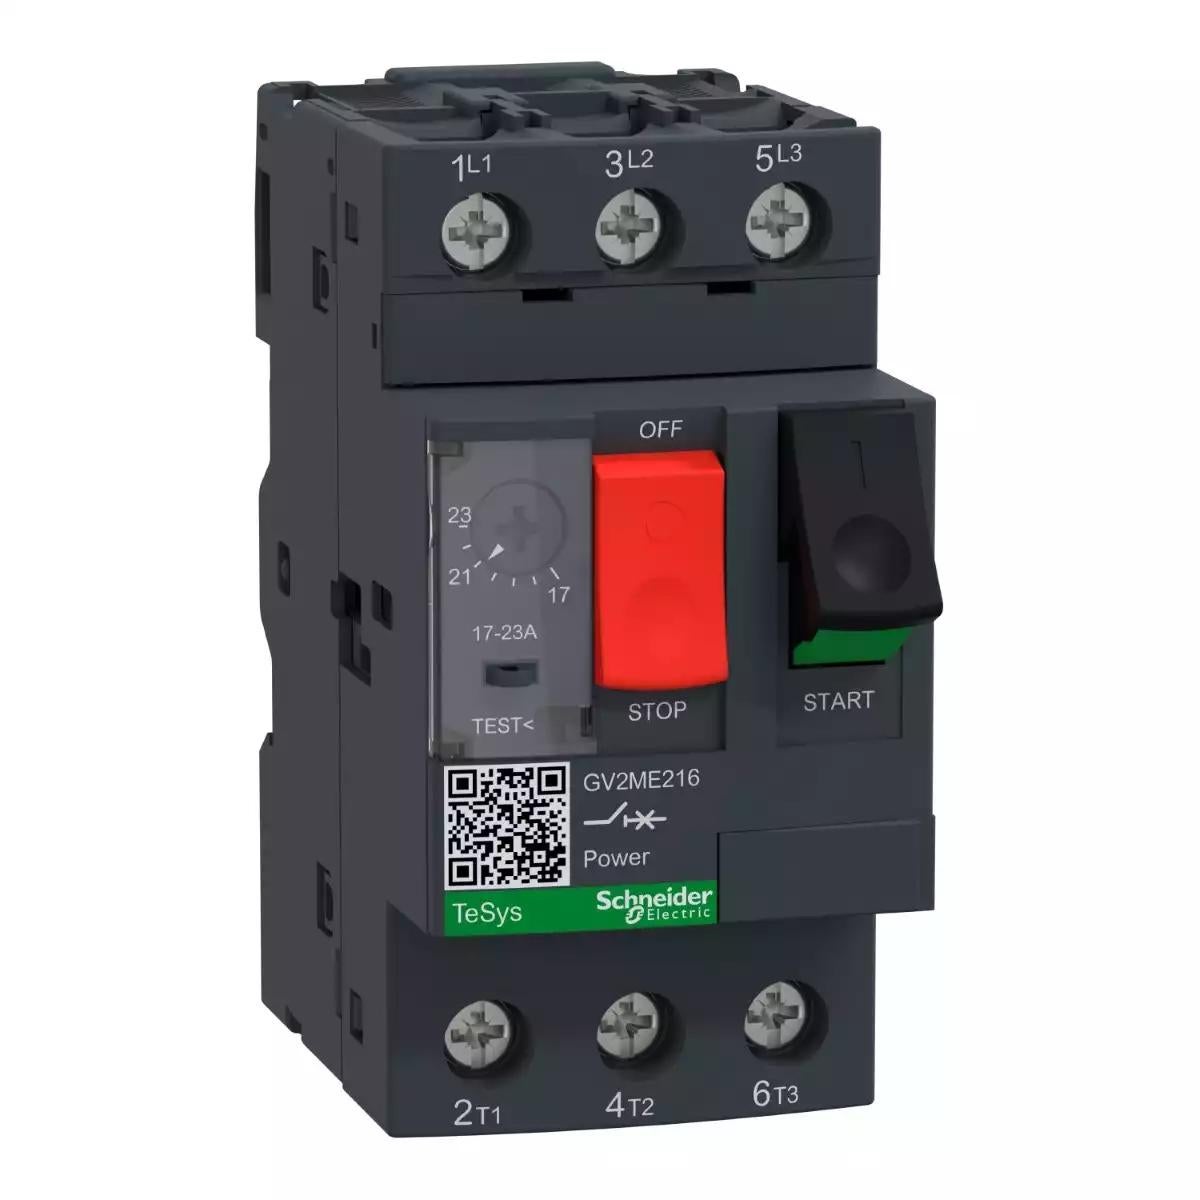 Motor circuit breaker,TeSys Deca frame 2,3P,17-23A,thermal magnetic,push button,lugs terminals